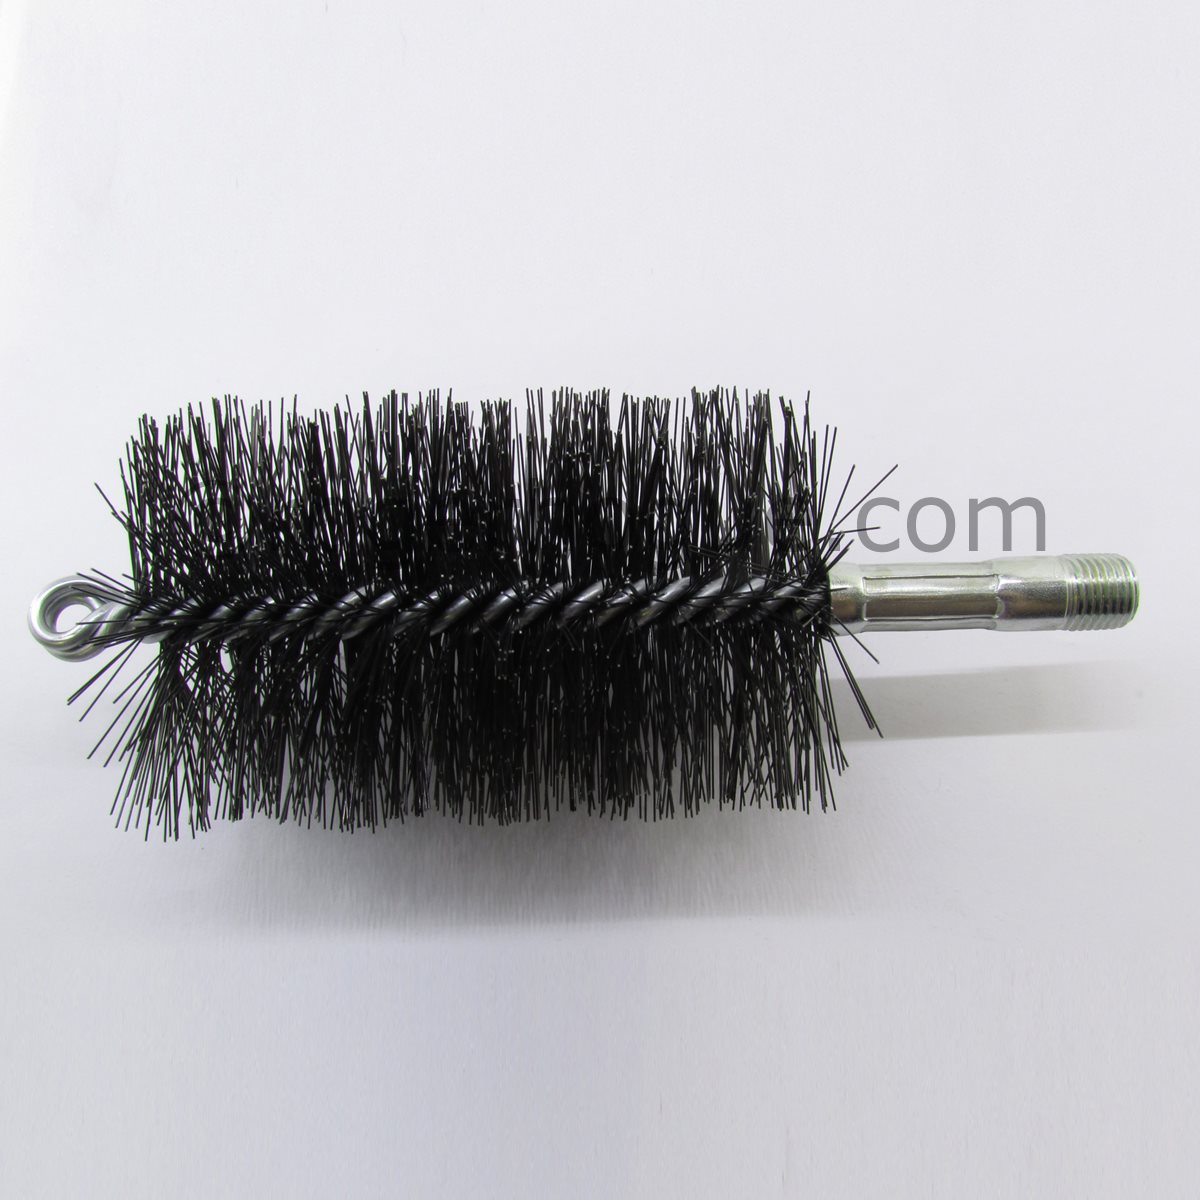 2.75'' DOUBLE SPIRAL BRUSH